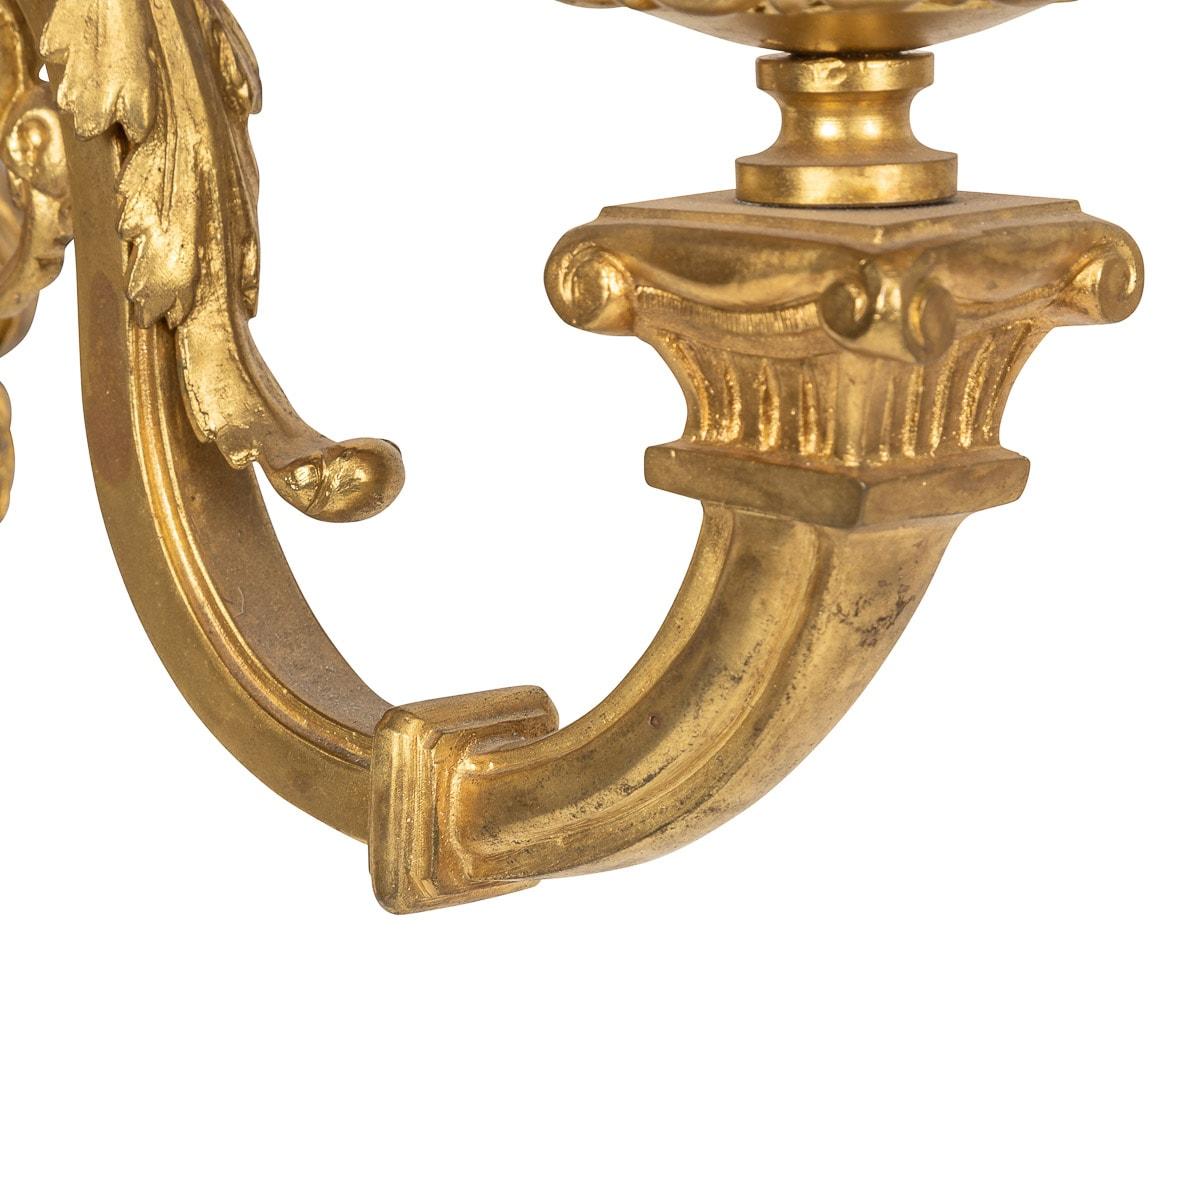 Bronze 19th Century French Régence Style Ormolu D'appliques Wall Lights, C.1830 For Sale